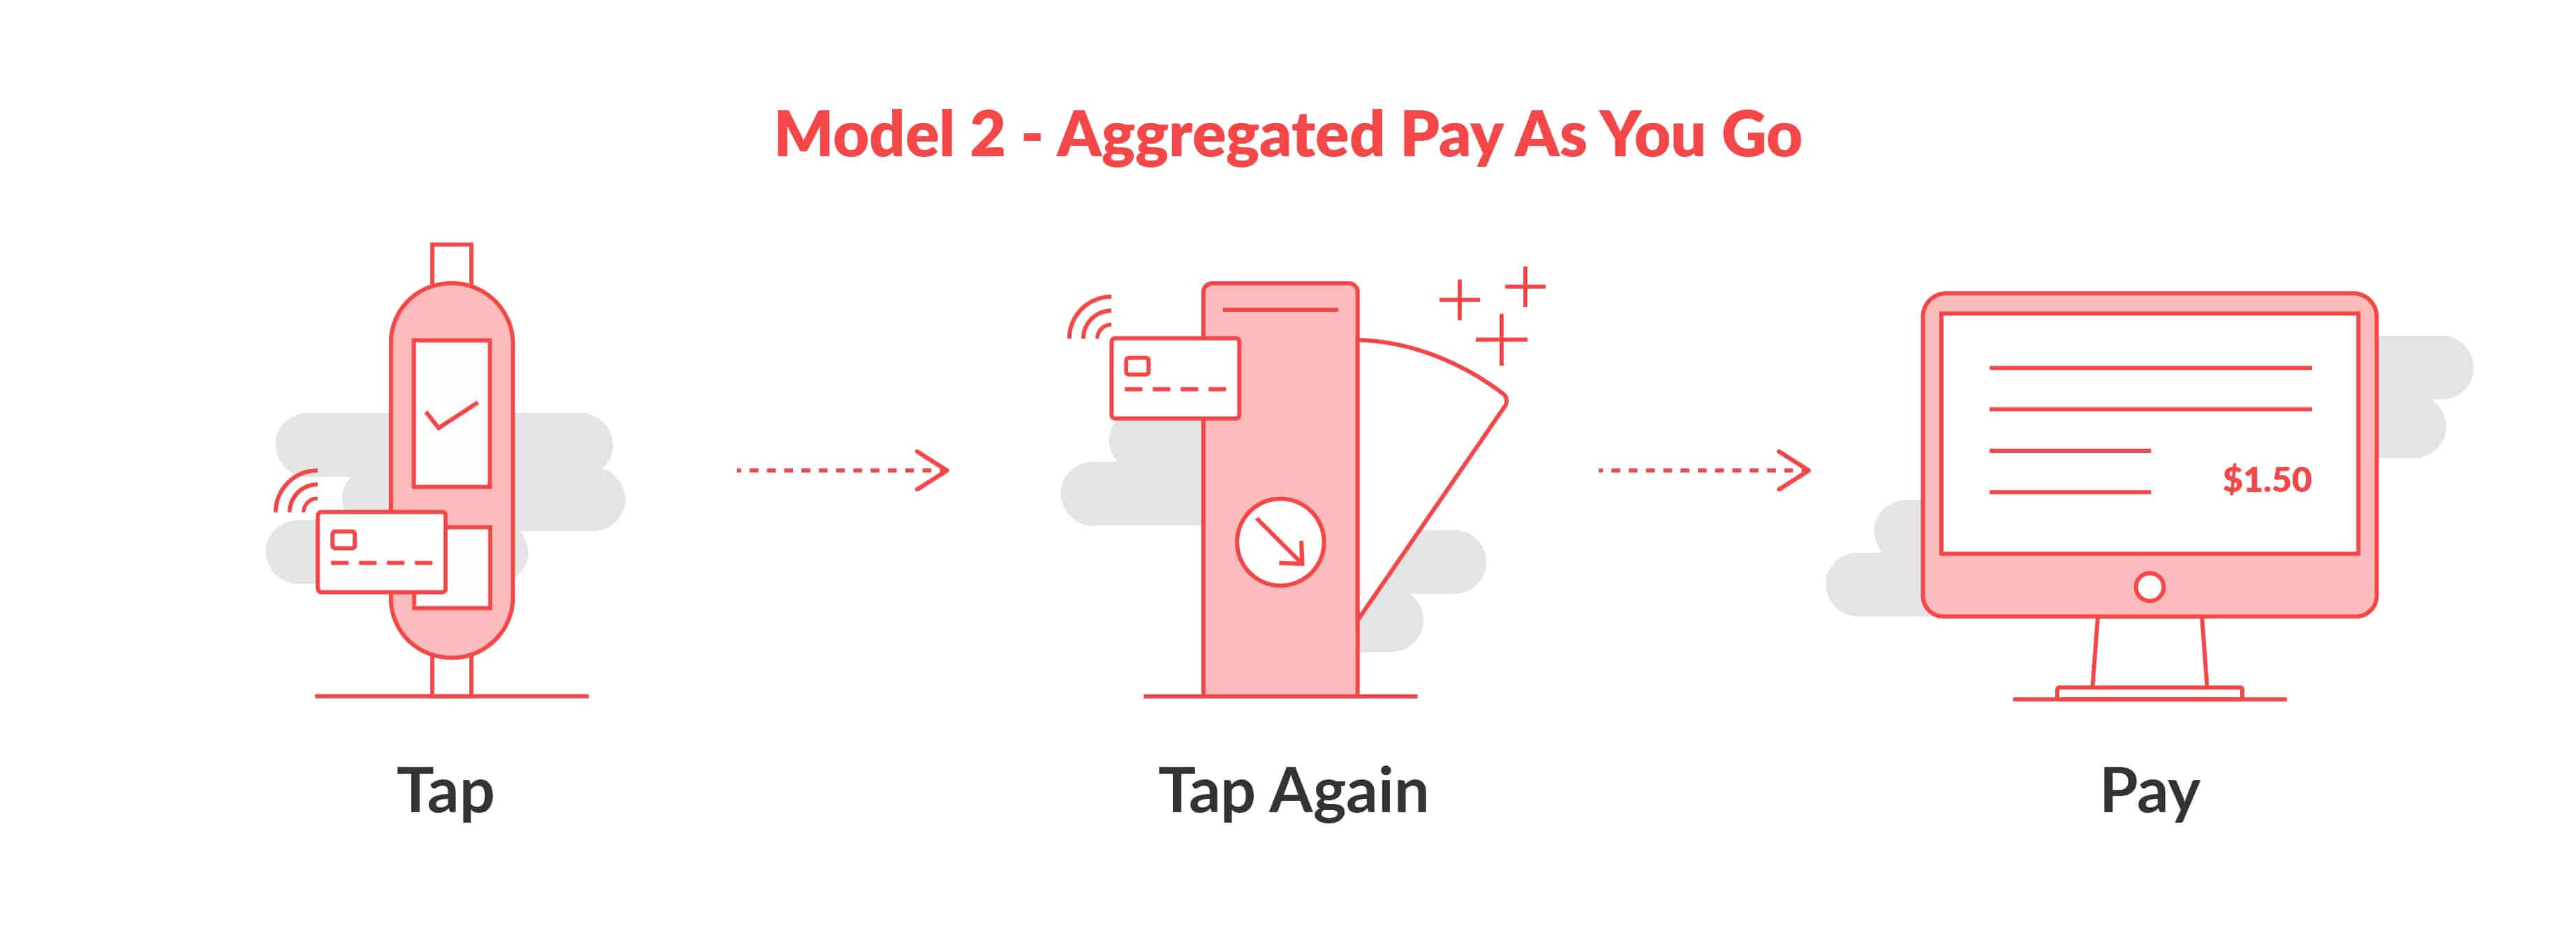 model-2-aggregated-pay-as-you-go